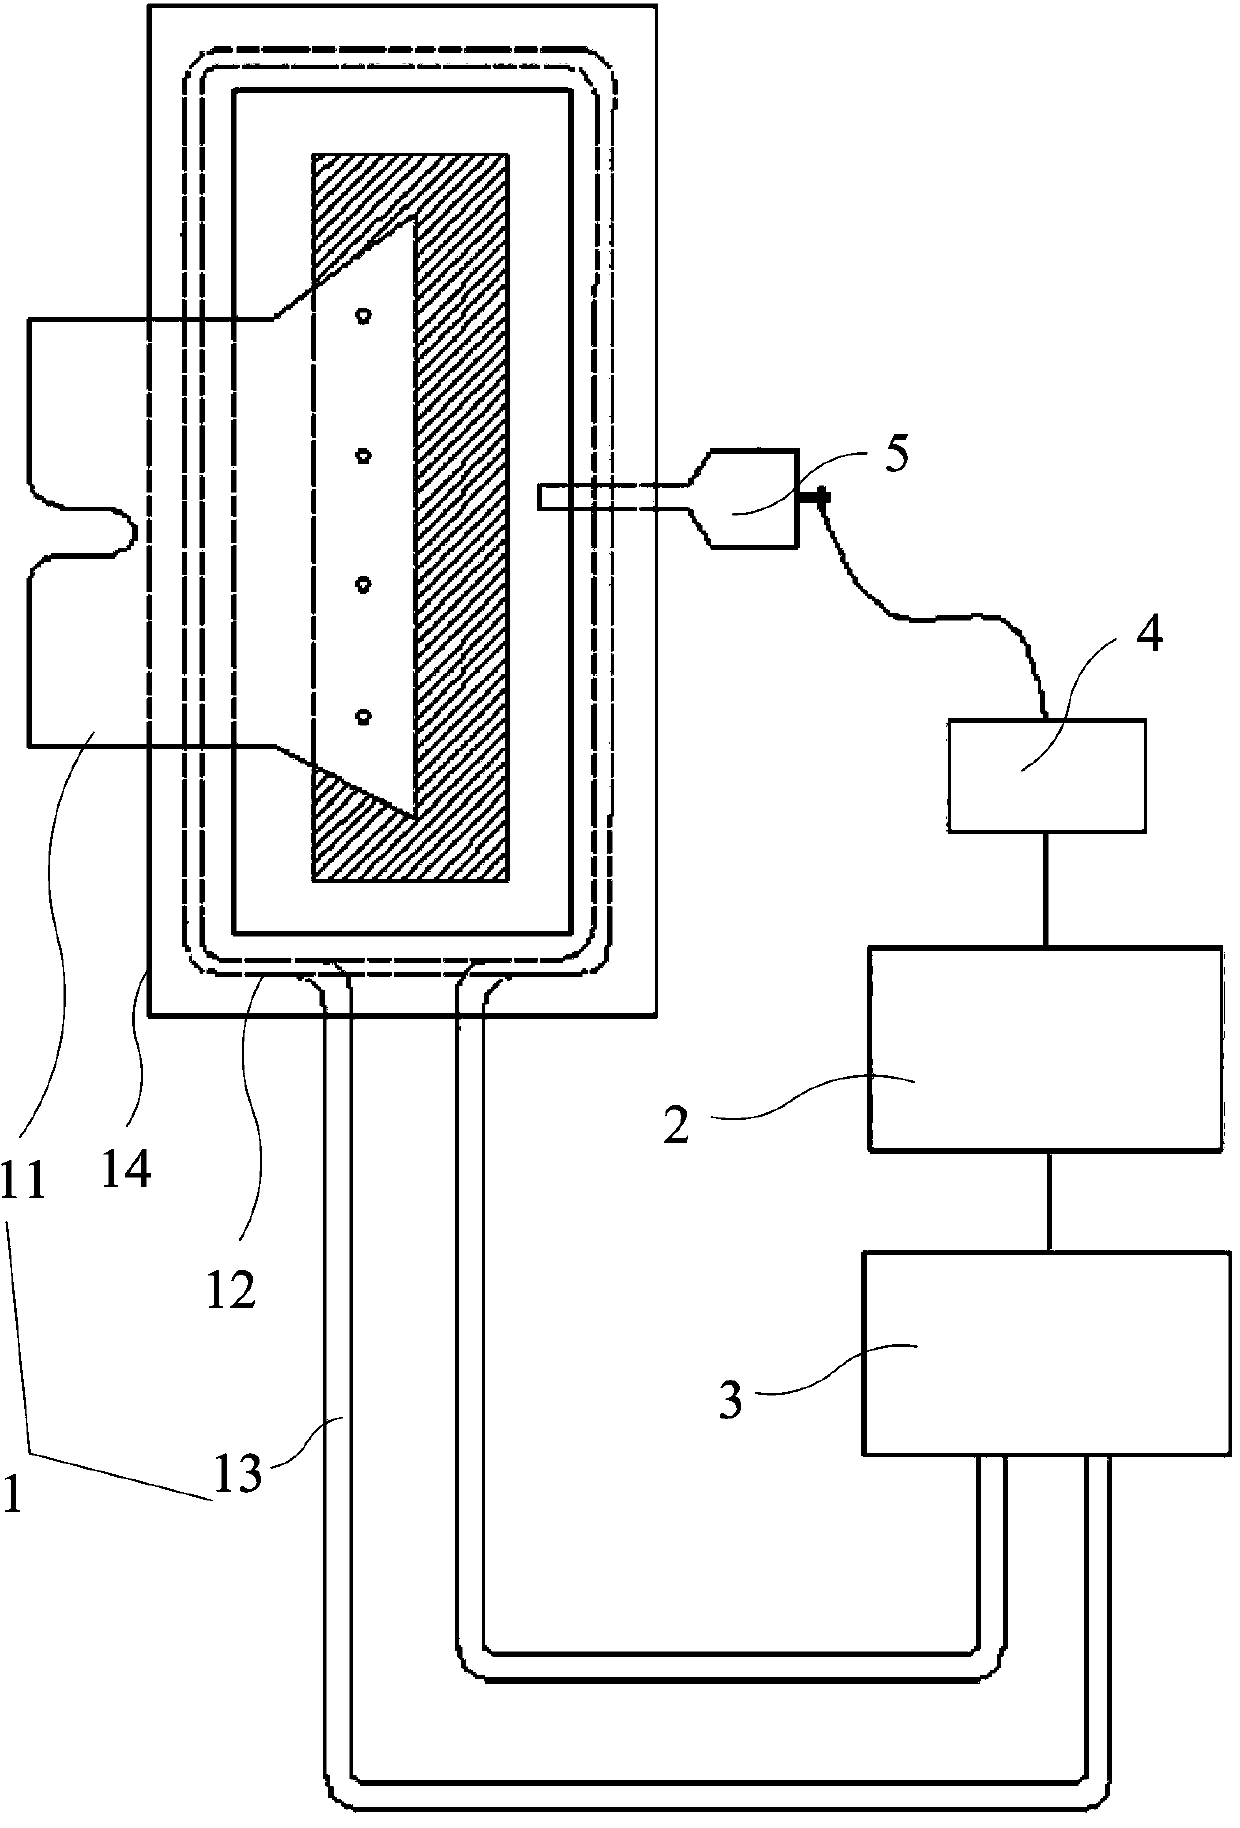 Heating device and method for graphite anode in rare earth molten salt electrolysis